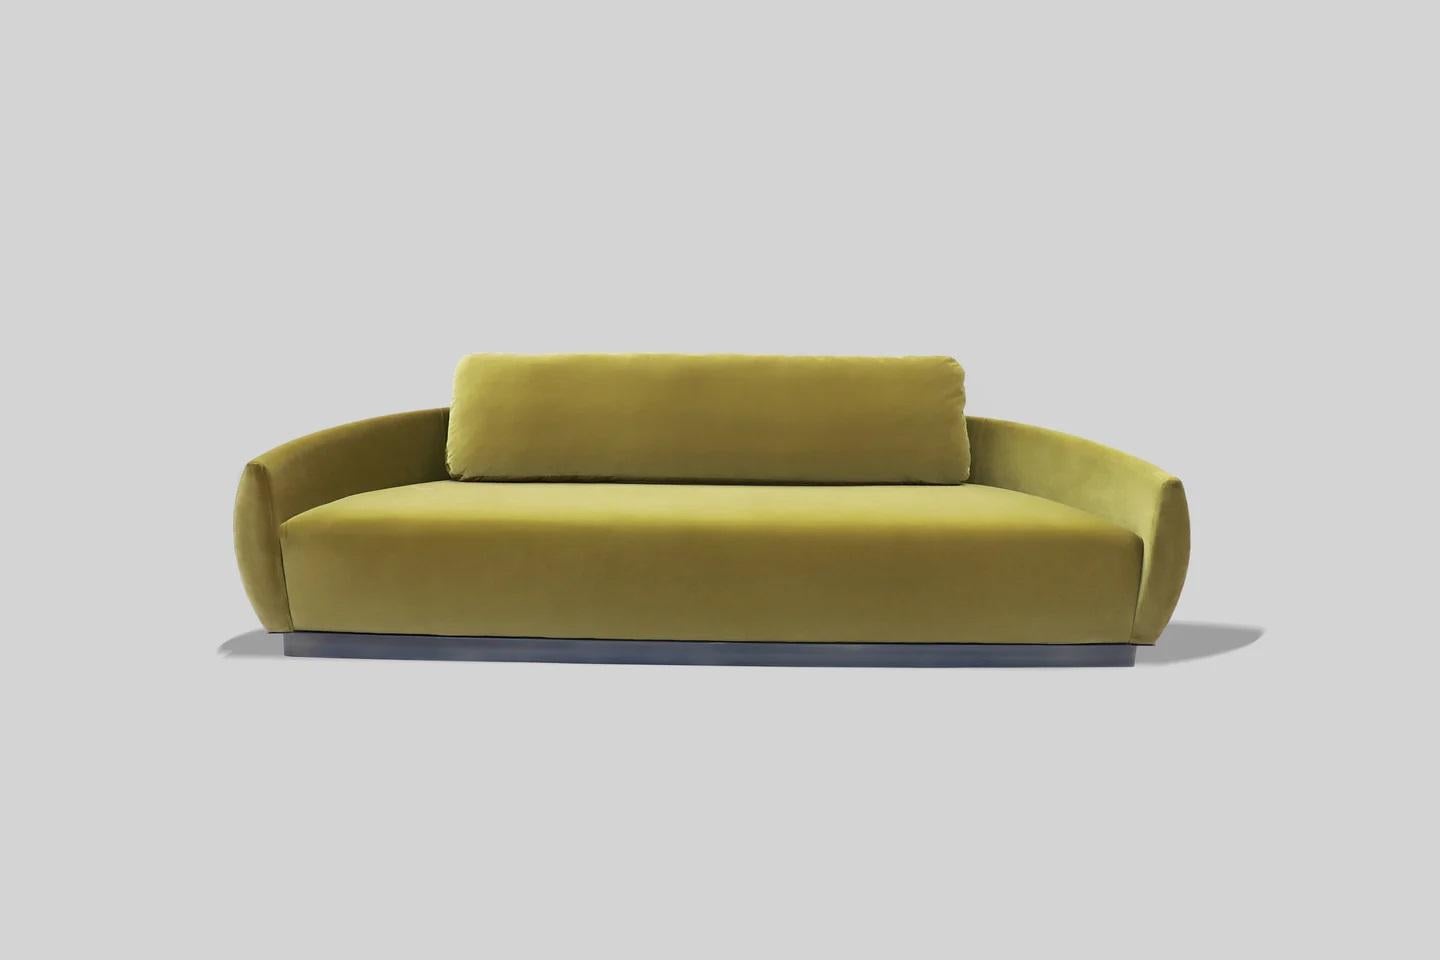 Egge Green Sofa by Atra Design
Dimensions: D 250 x W 956 x H 62.4 cm.
Materials: Brass and velvet fabric upholstery.

Different fabric options available. Please contact us. 

Atra Design
We are Atra, a furniture brand produced by Atra form a mexico